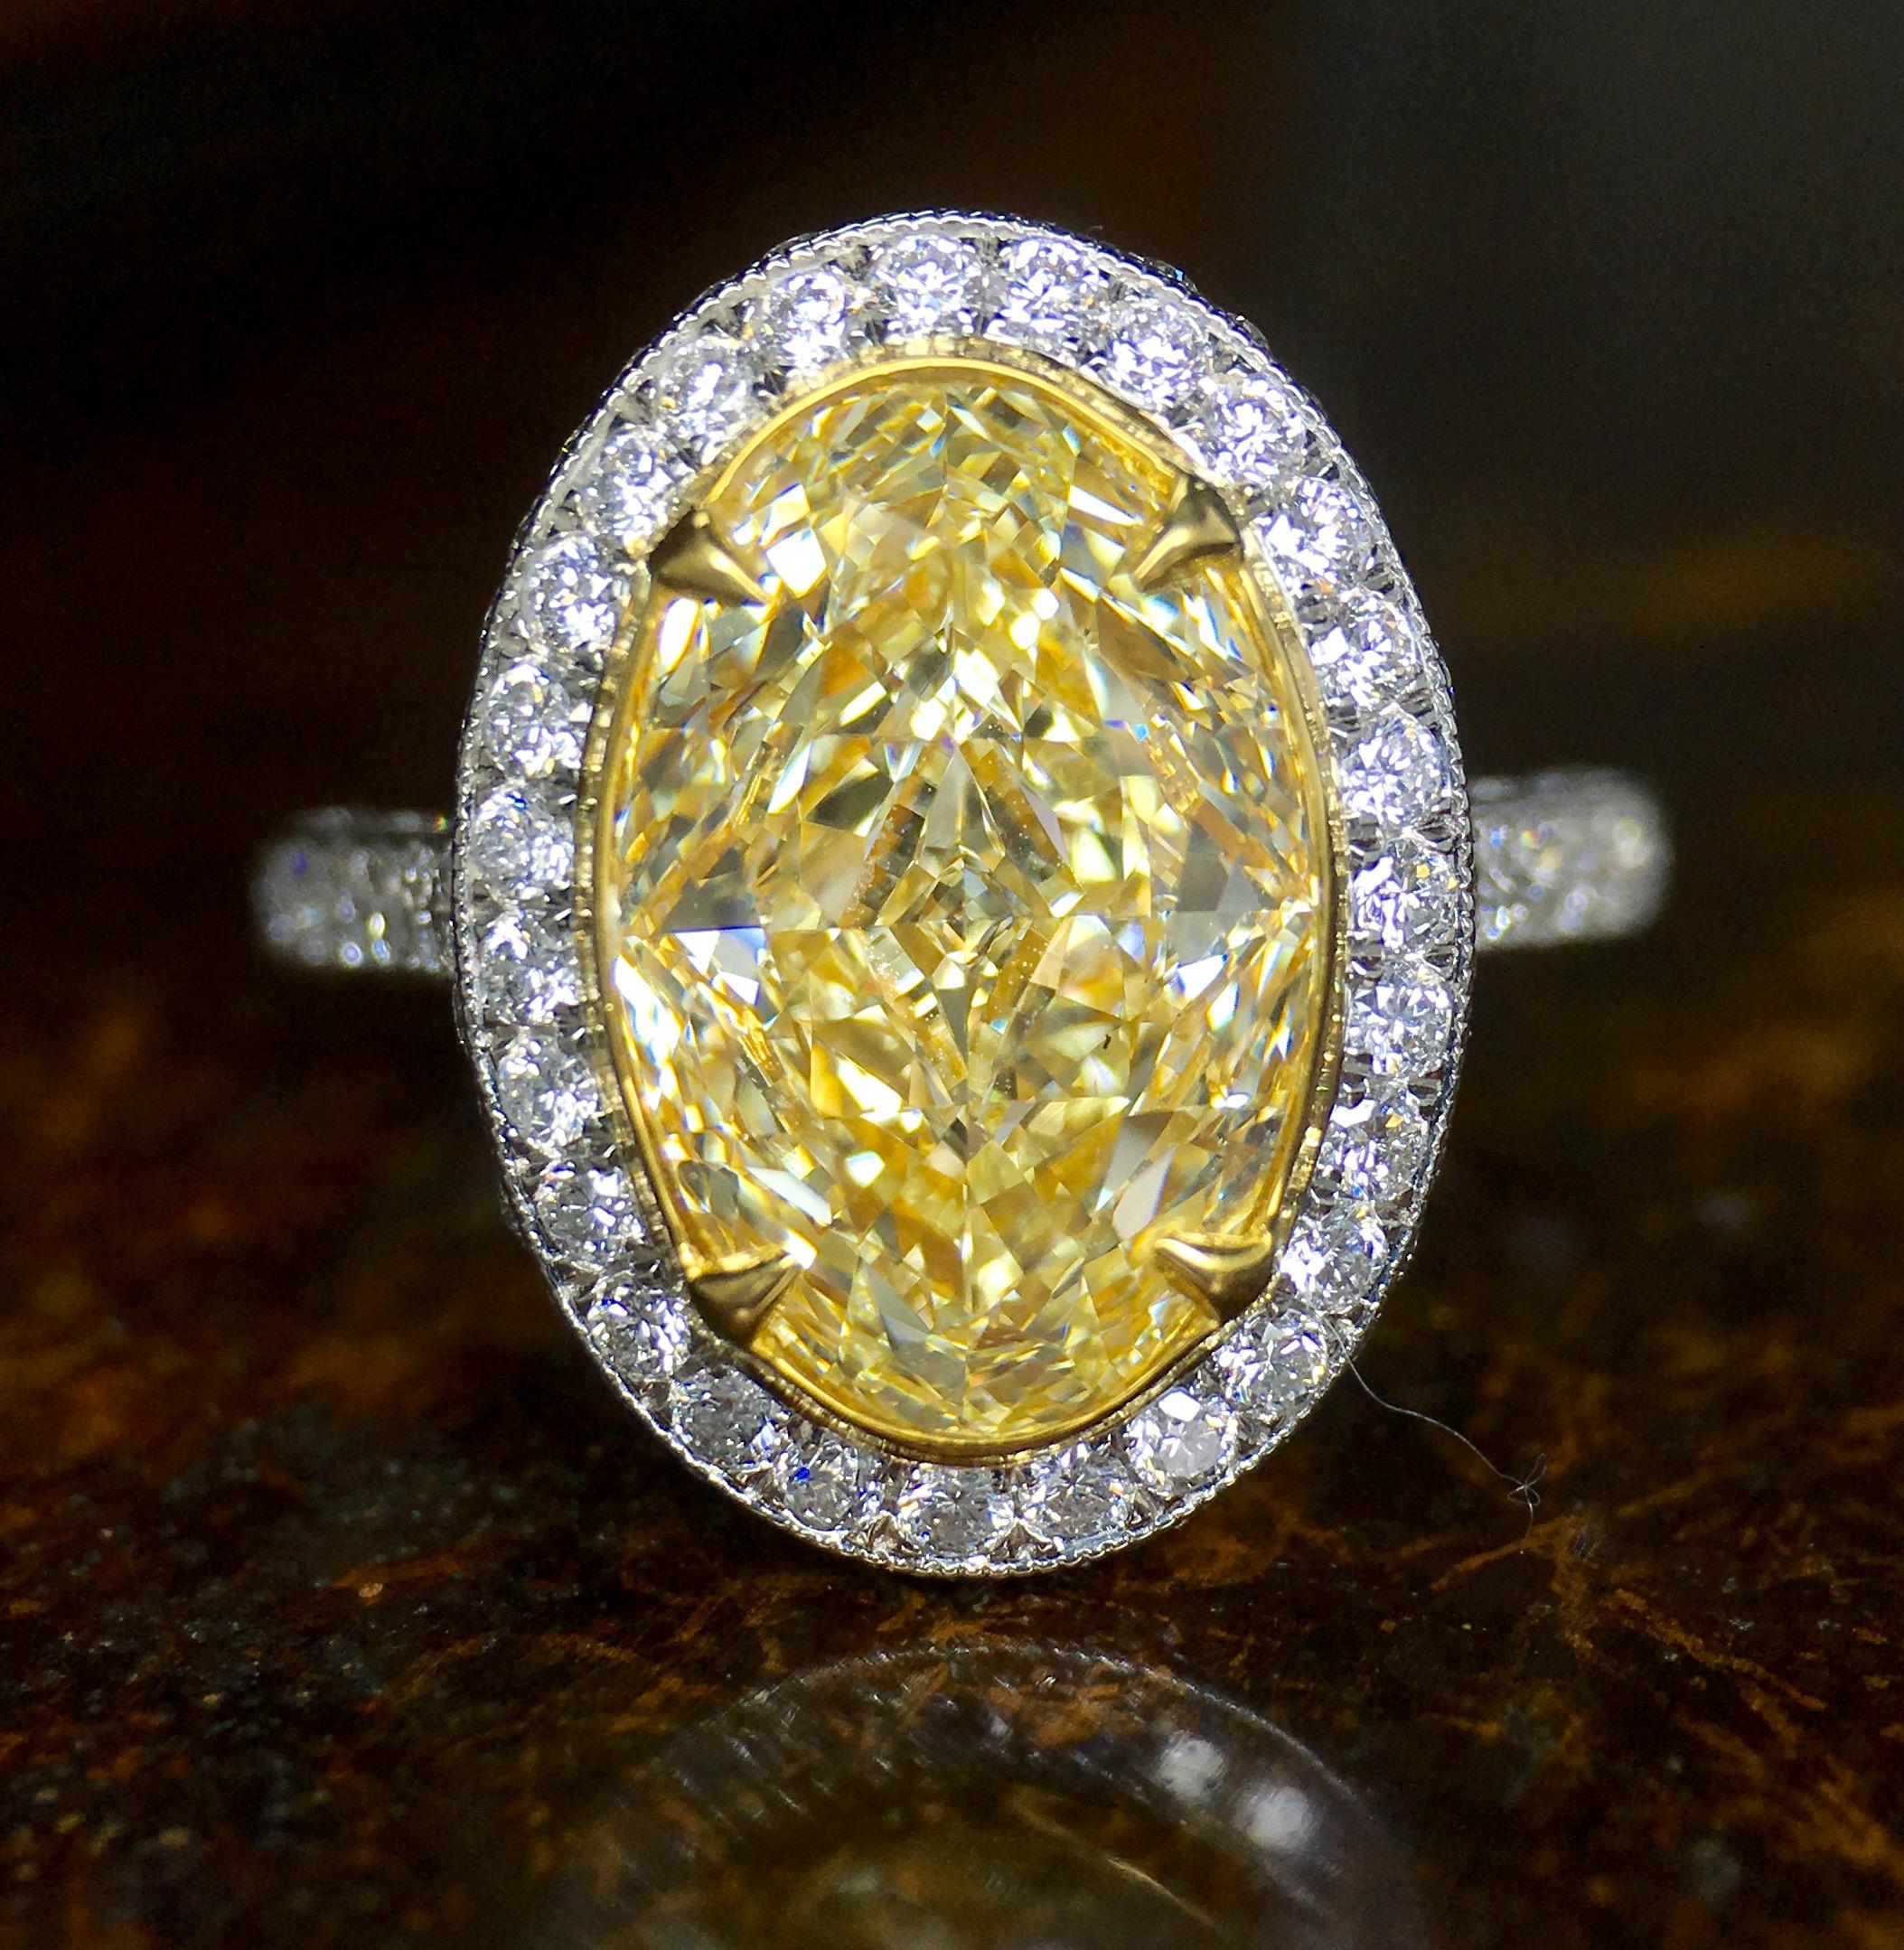 Contemporary Certified 3.17 Carat Fancy Yellow Oval Diamond Engagement Ring in Platinum